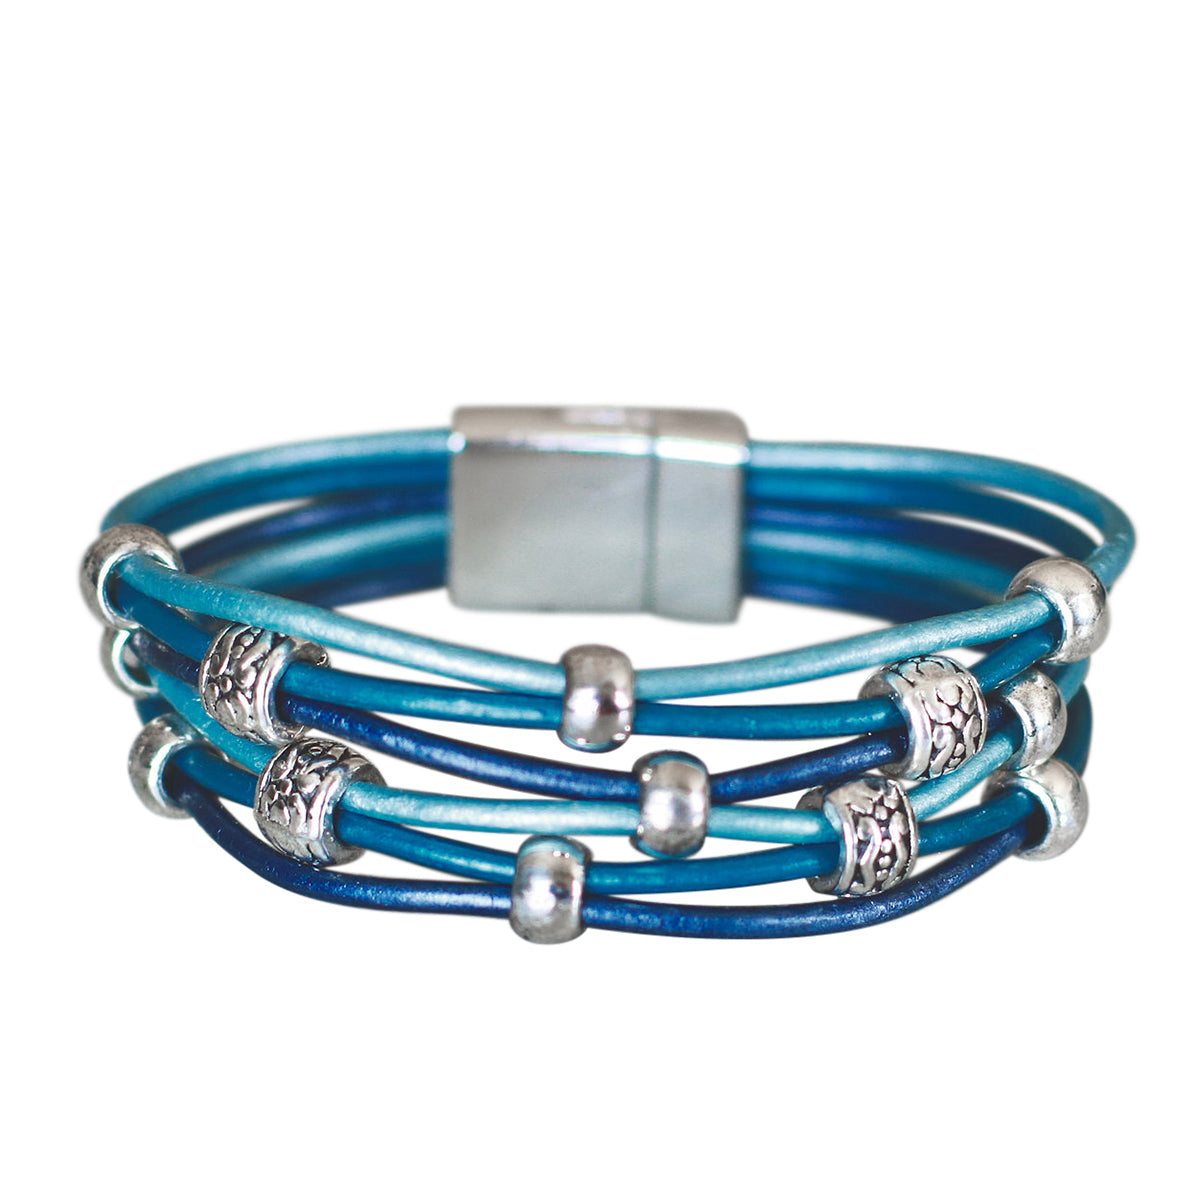 Butler Hill Nantucket bracelet Bluteal multi with pewter beads and silver accents on a white background.